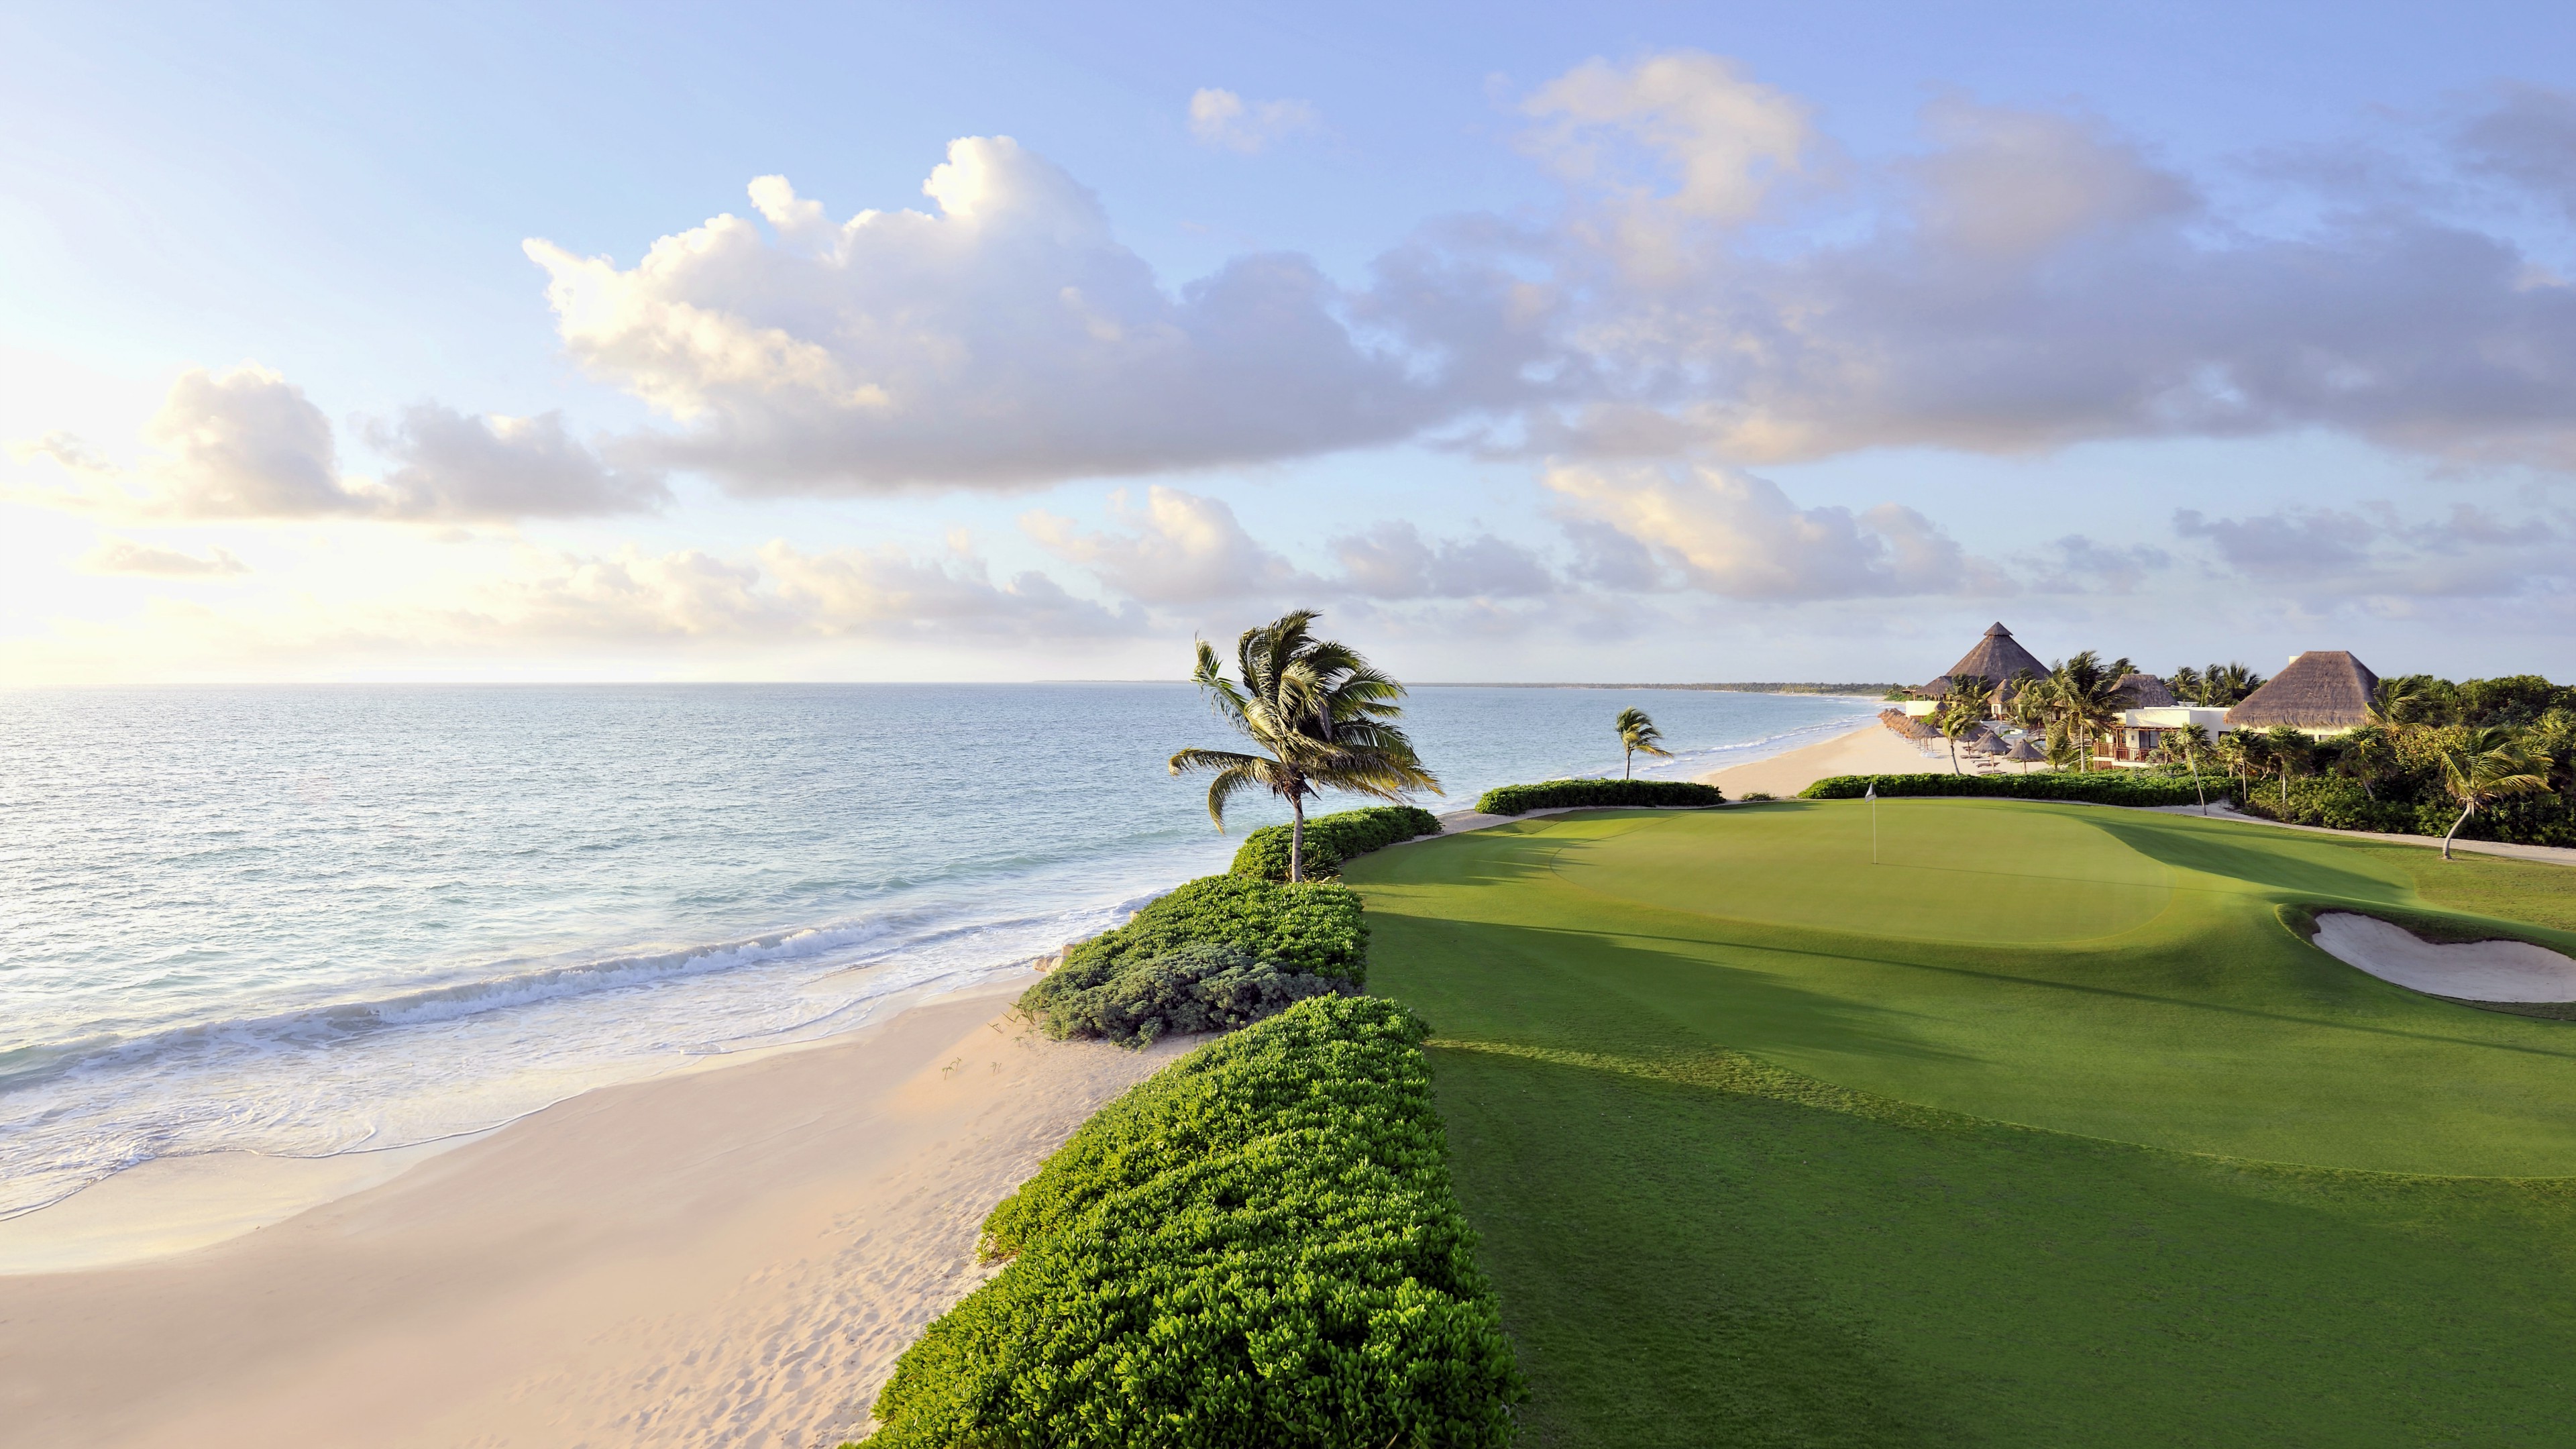 Nature Landscape Water Sea Mexico Golf Course Palm Trees Sand